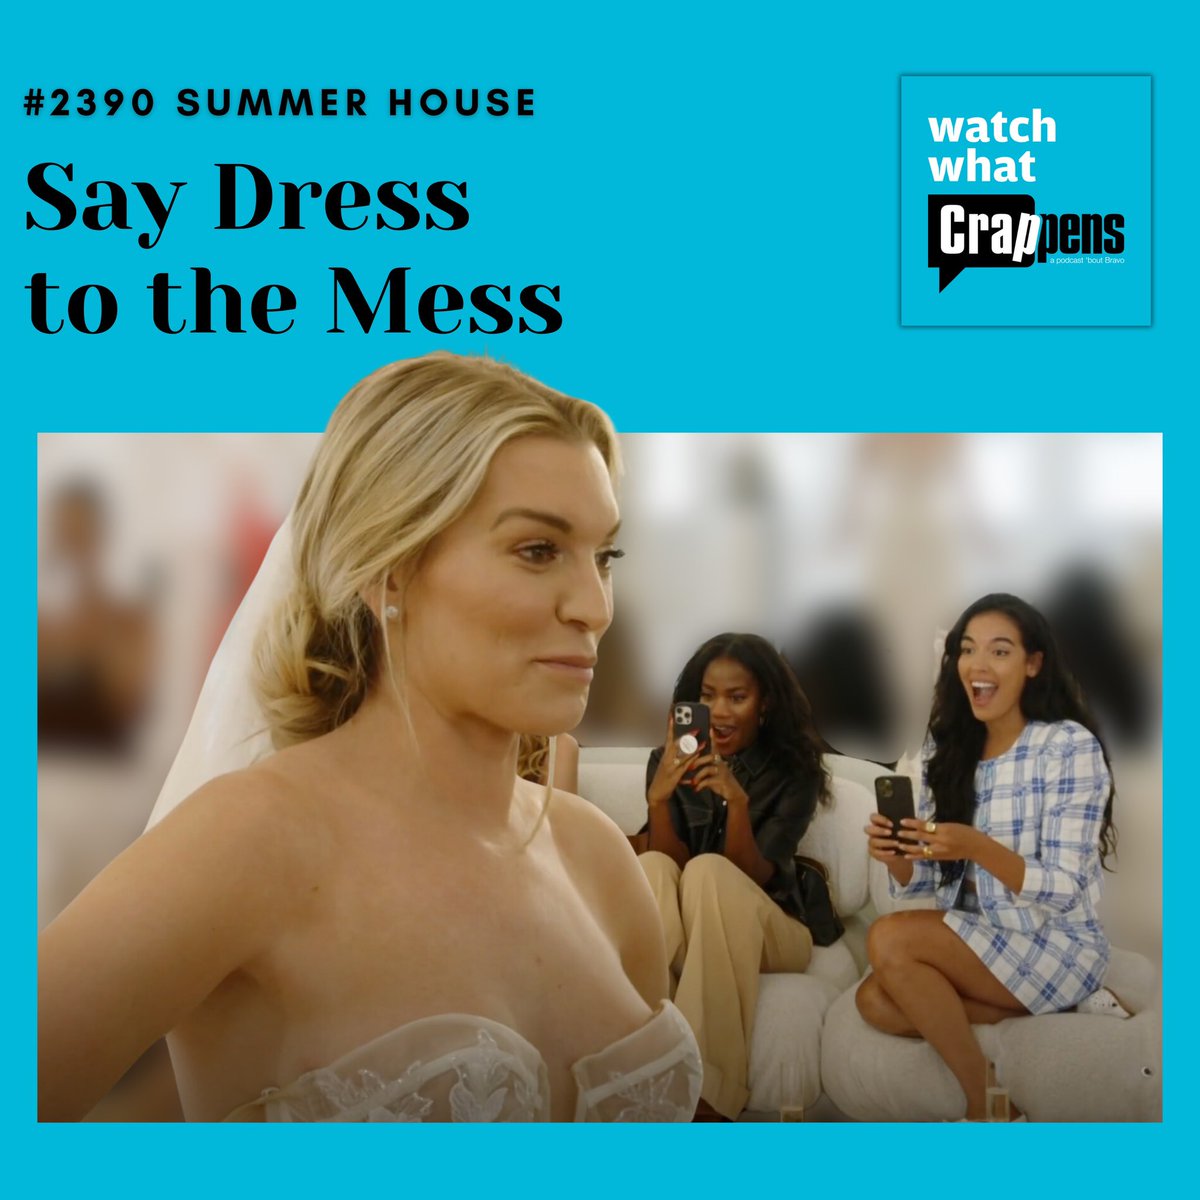 New epi! #SummerHouse spends another week on Kyle whining and Amanda whining and Lindsay choosing her dream wedding dress even though her relationship is a mess. Listen wherever you get your Podcasts or watch as a Crappens On Demand Video! #BravoTV @BenMandelker @RonnieKaram